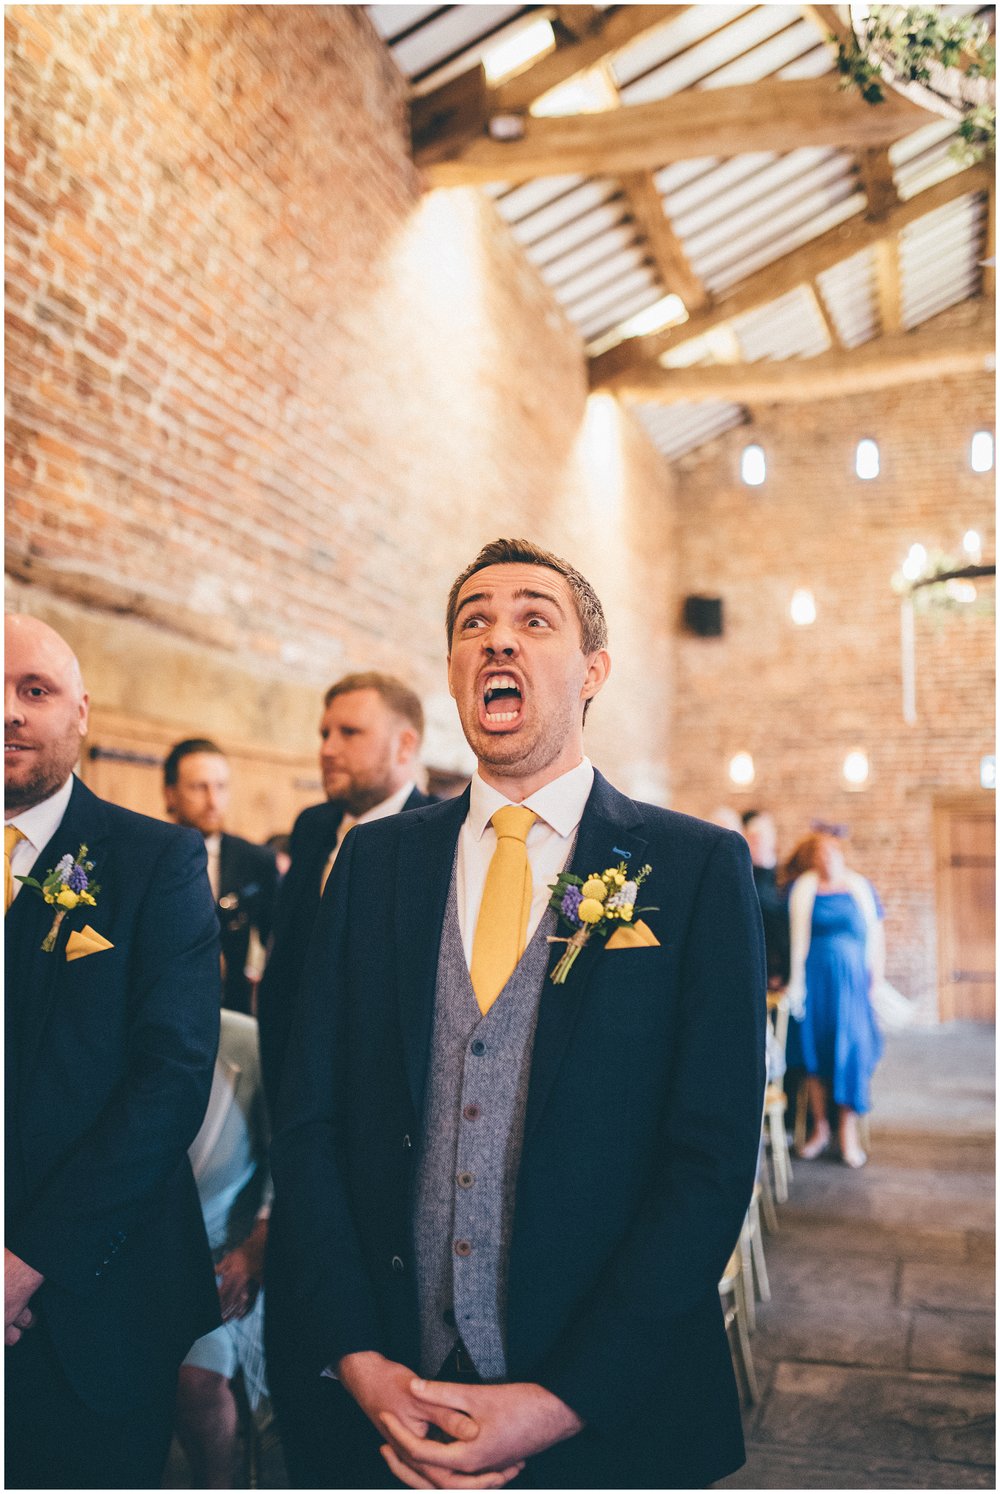 Nervous groom at the top of the aisle waiting for his bride at Meols Hall